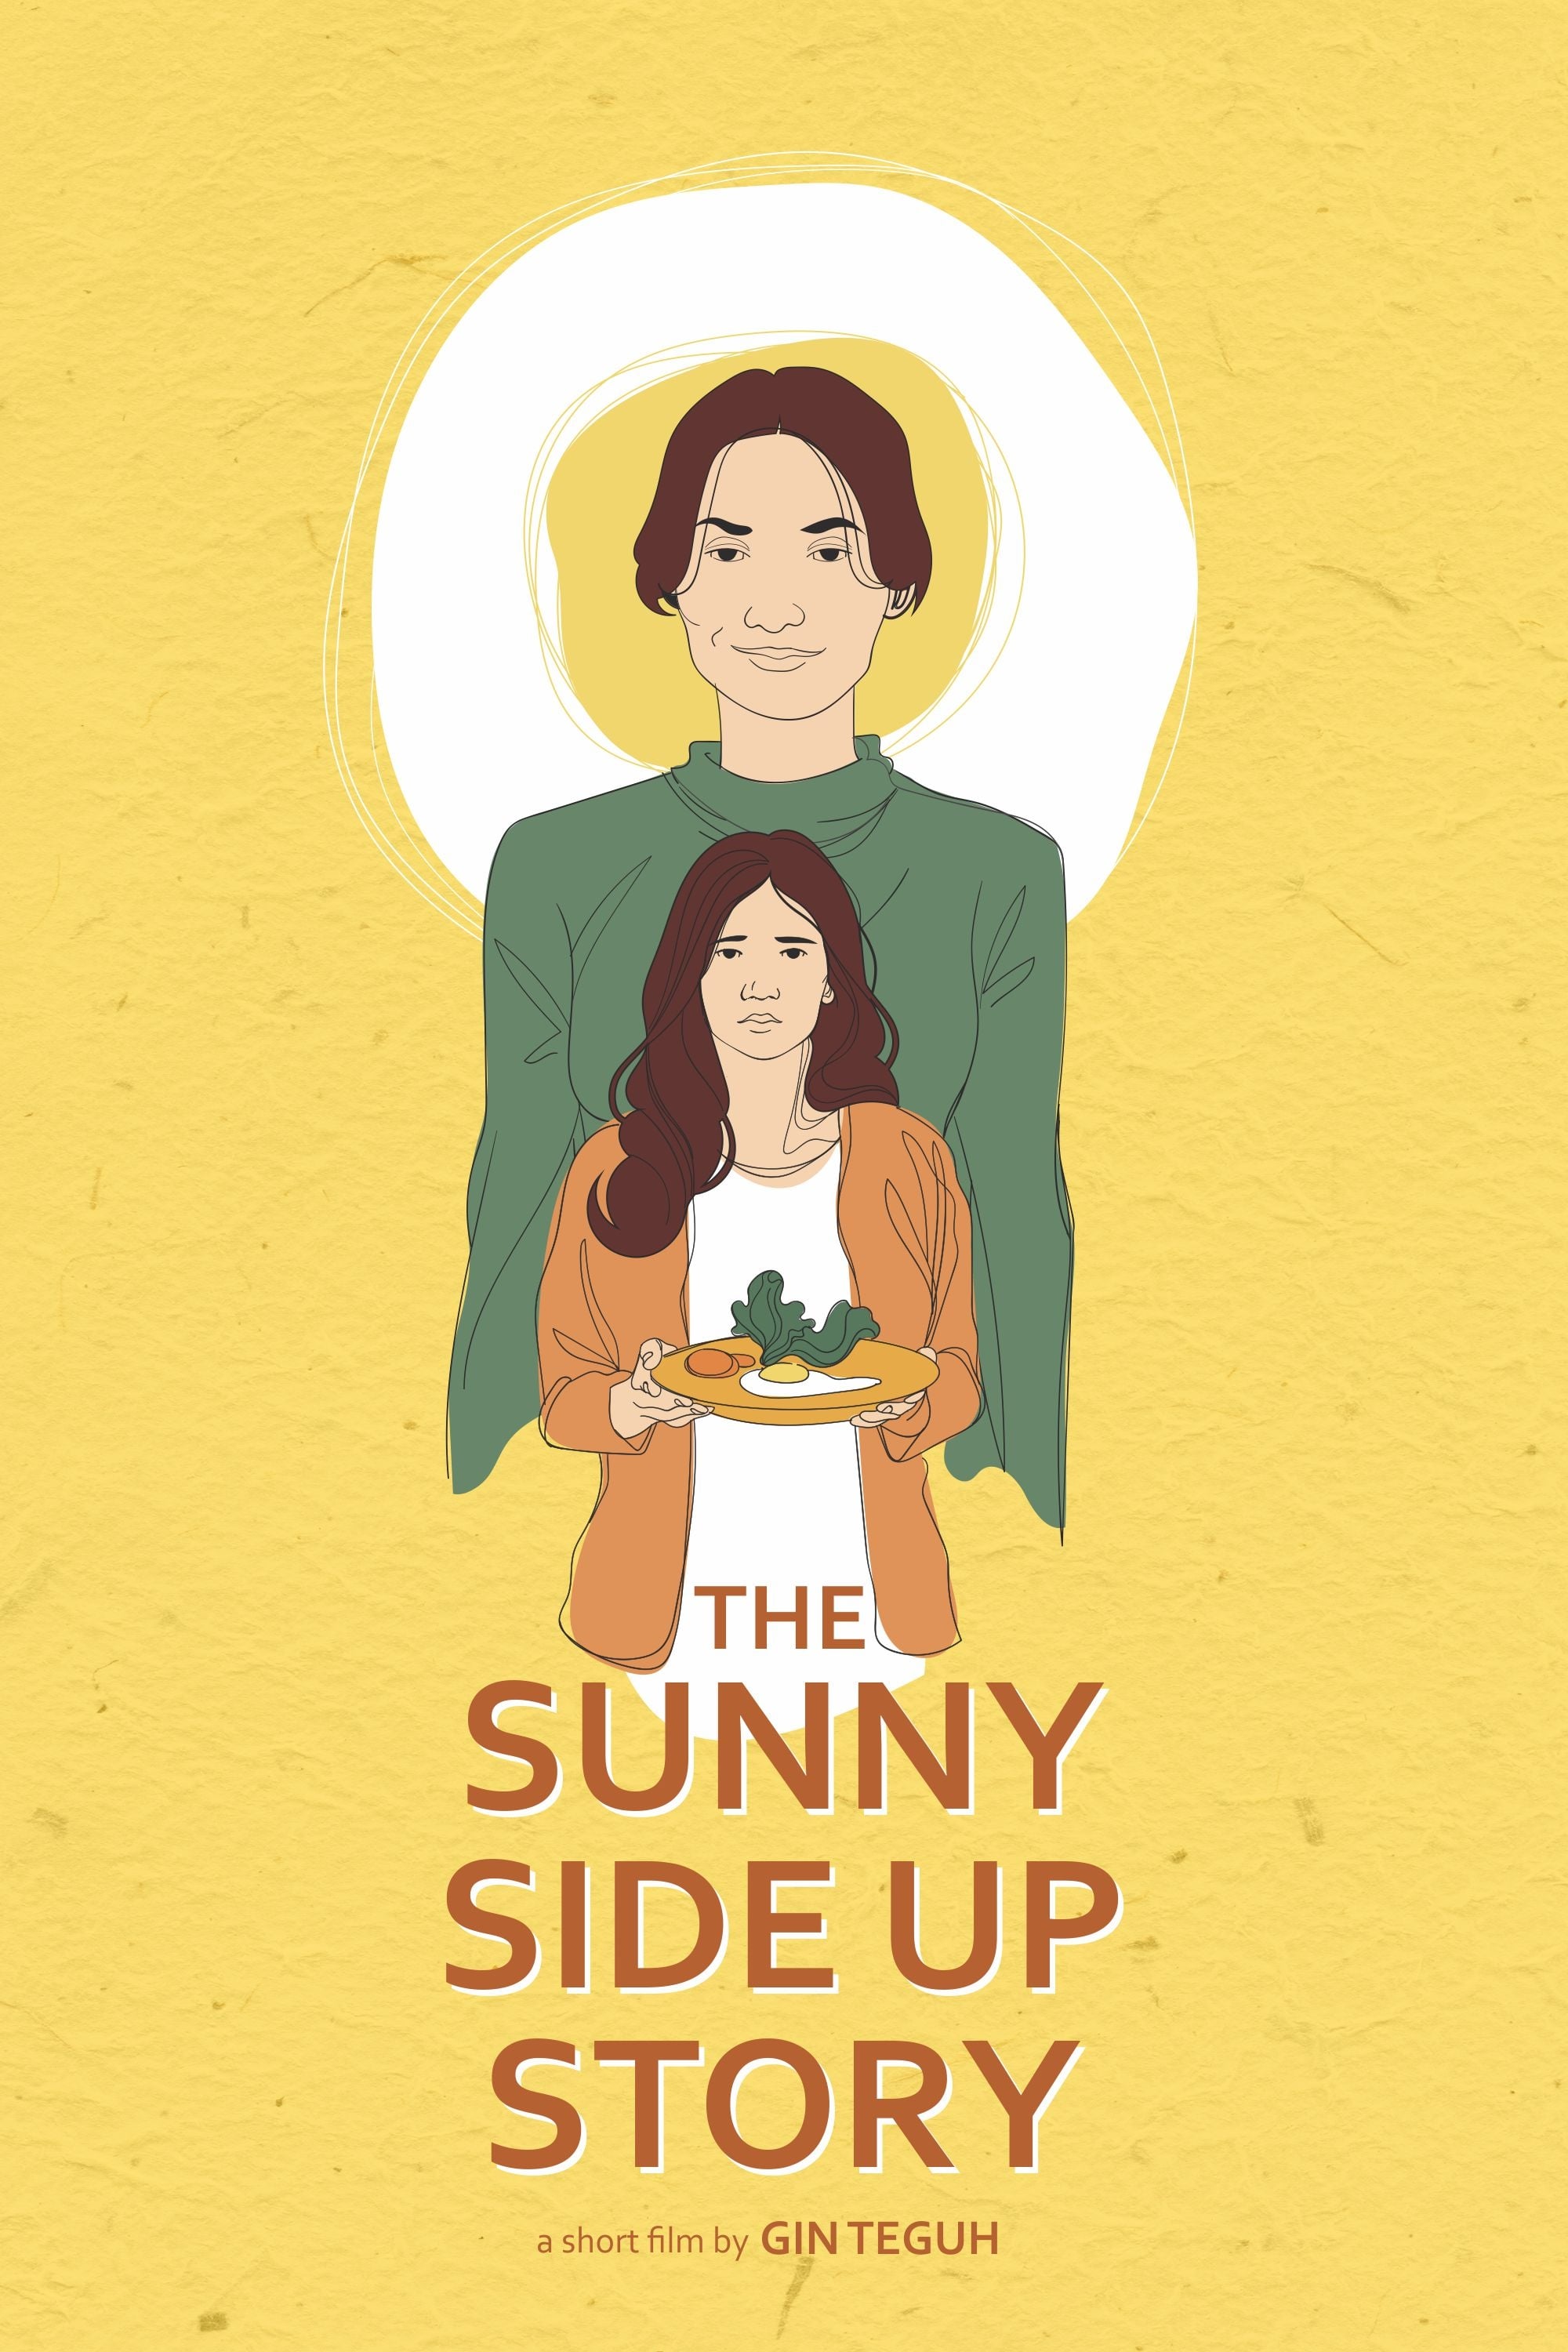 The Sunny Side Up Story